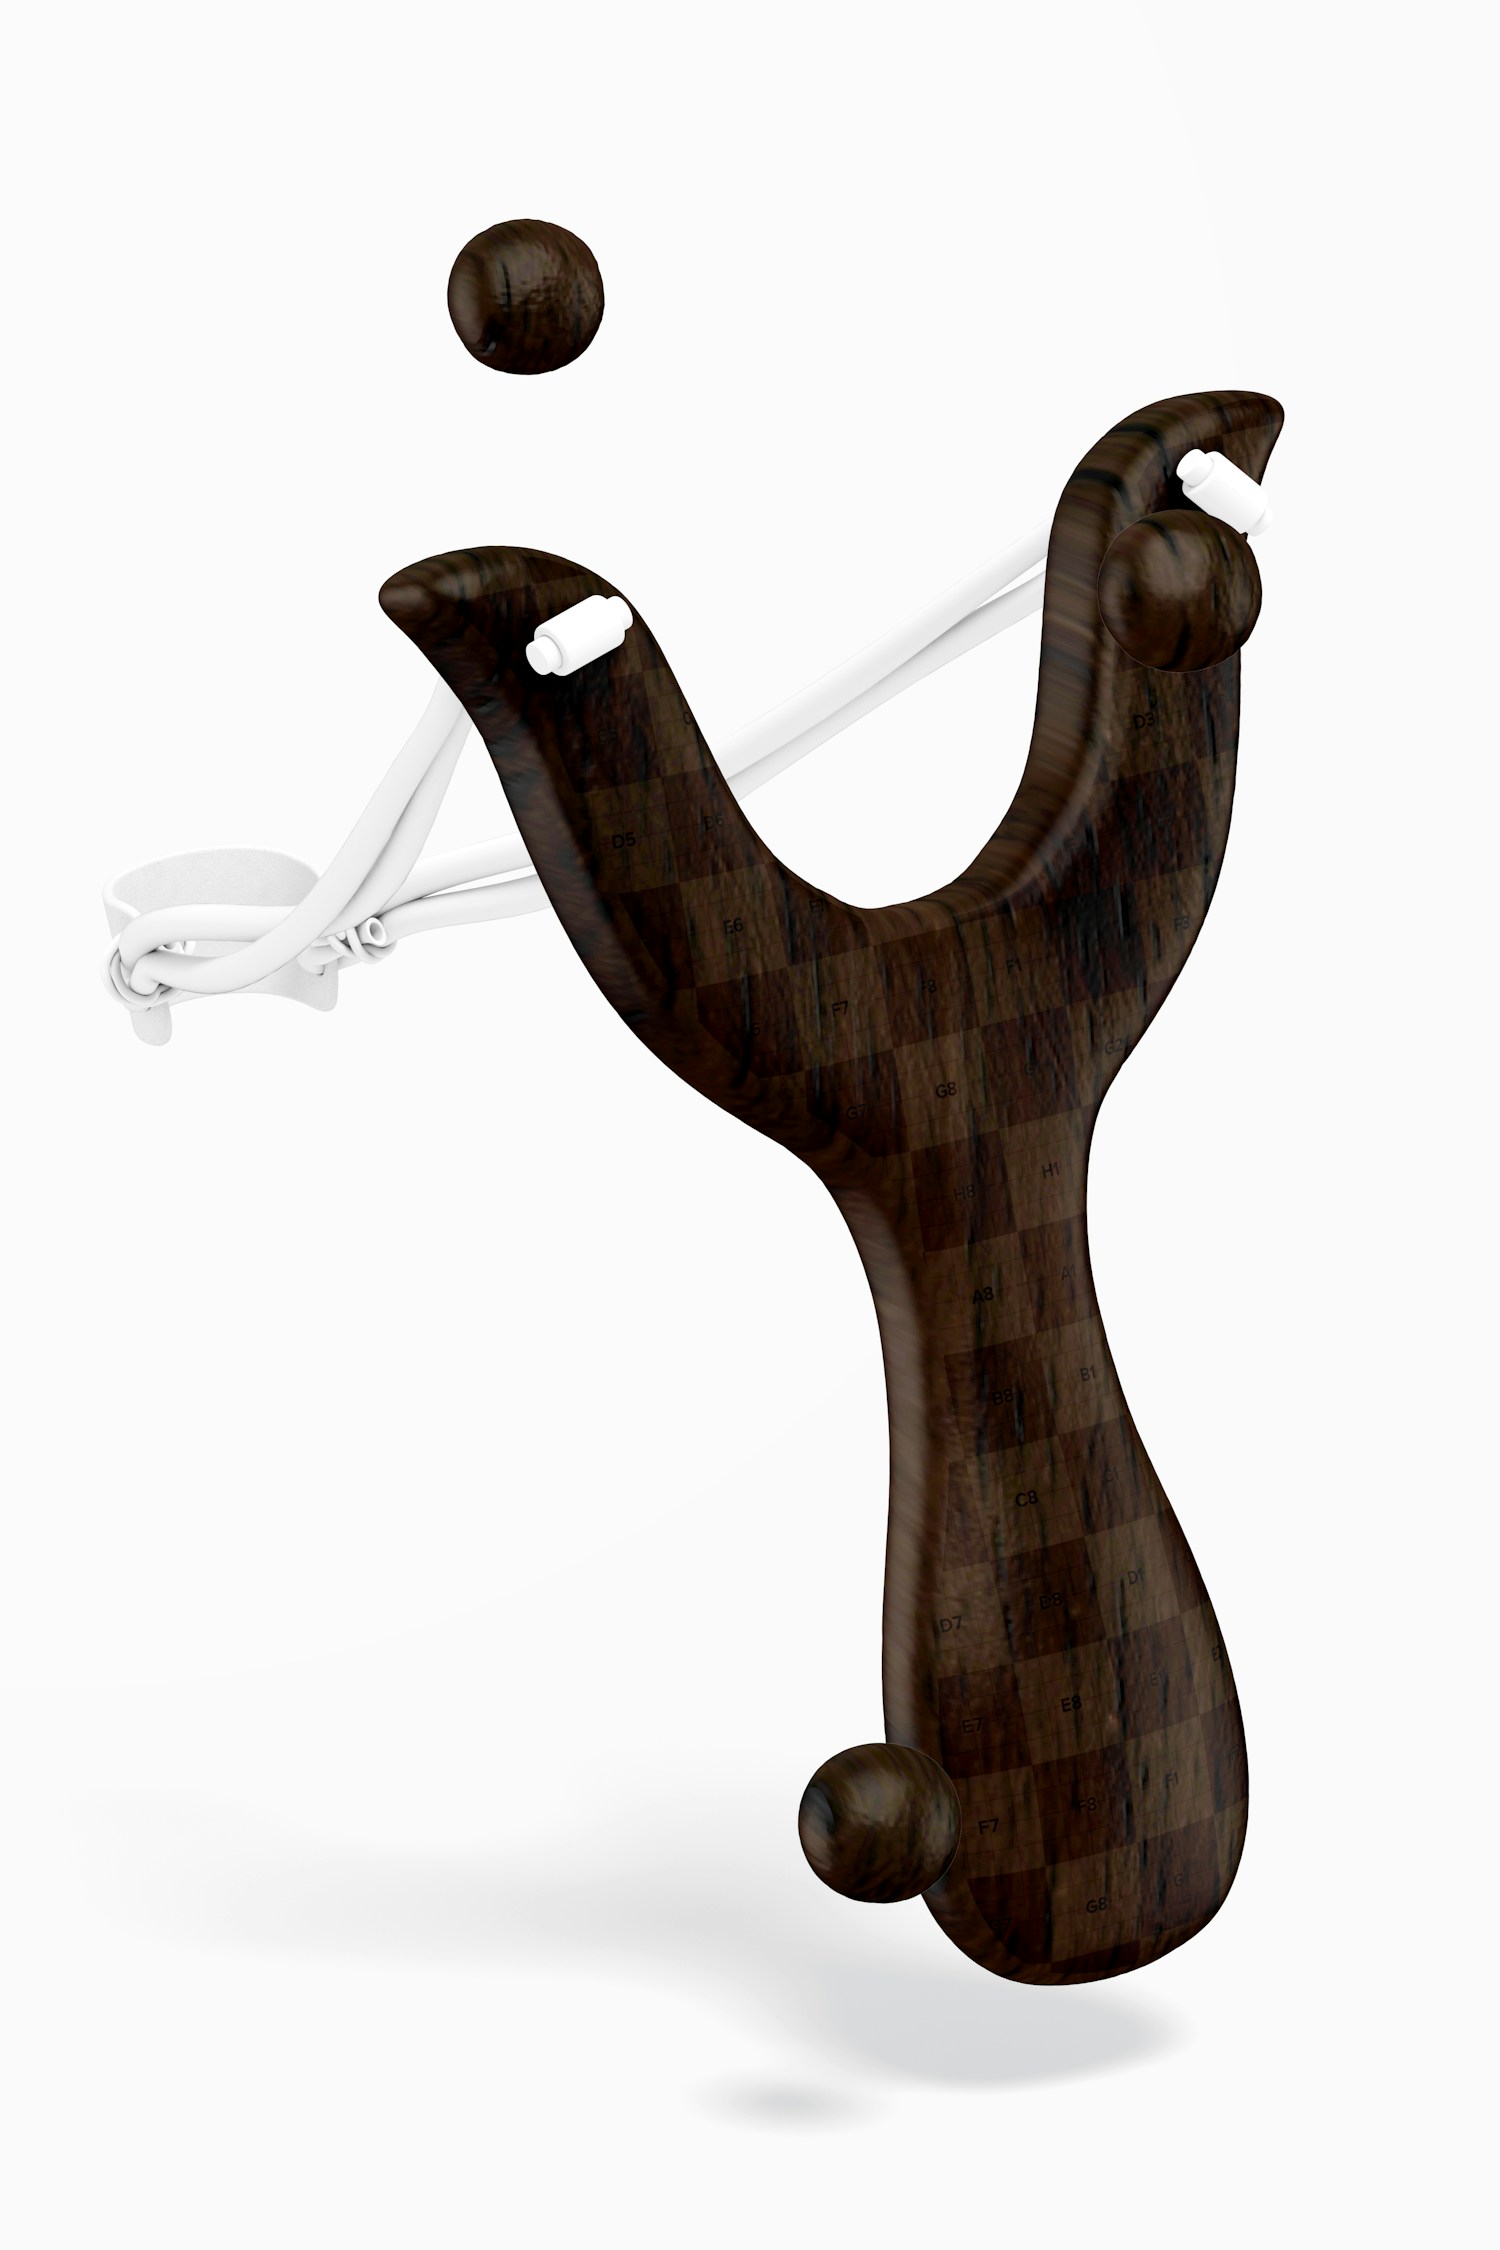 Wooden Slingshot Toy Mockup, Perspective View